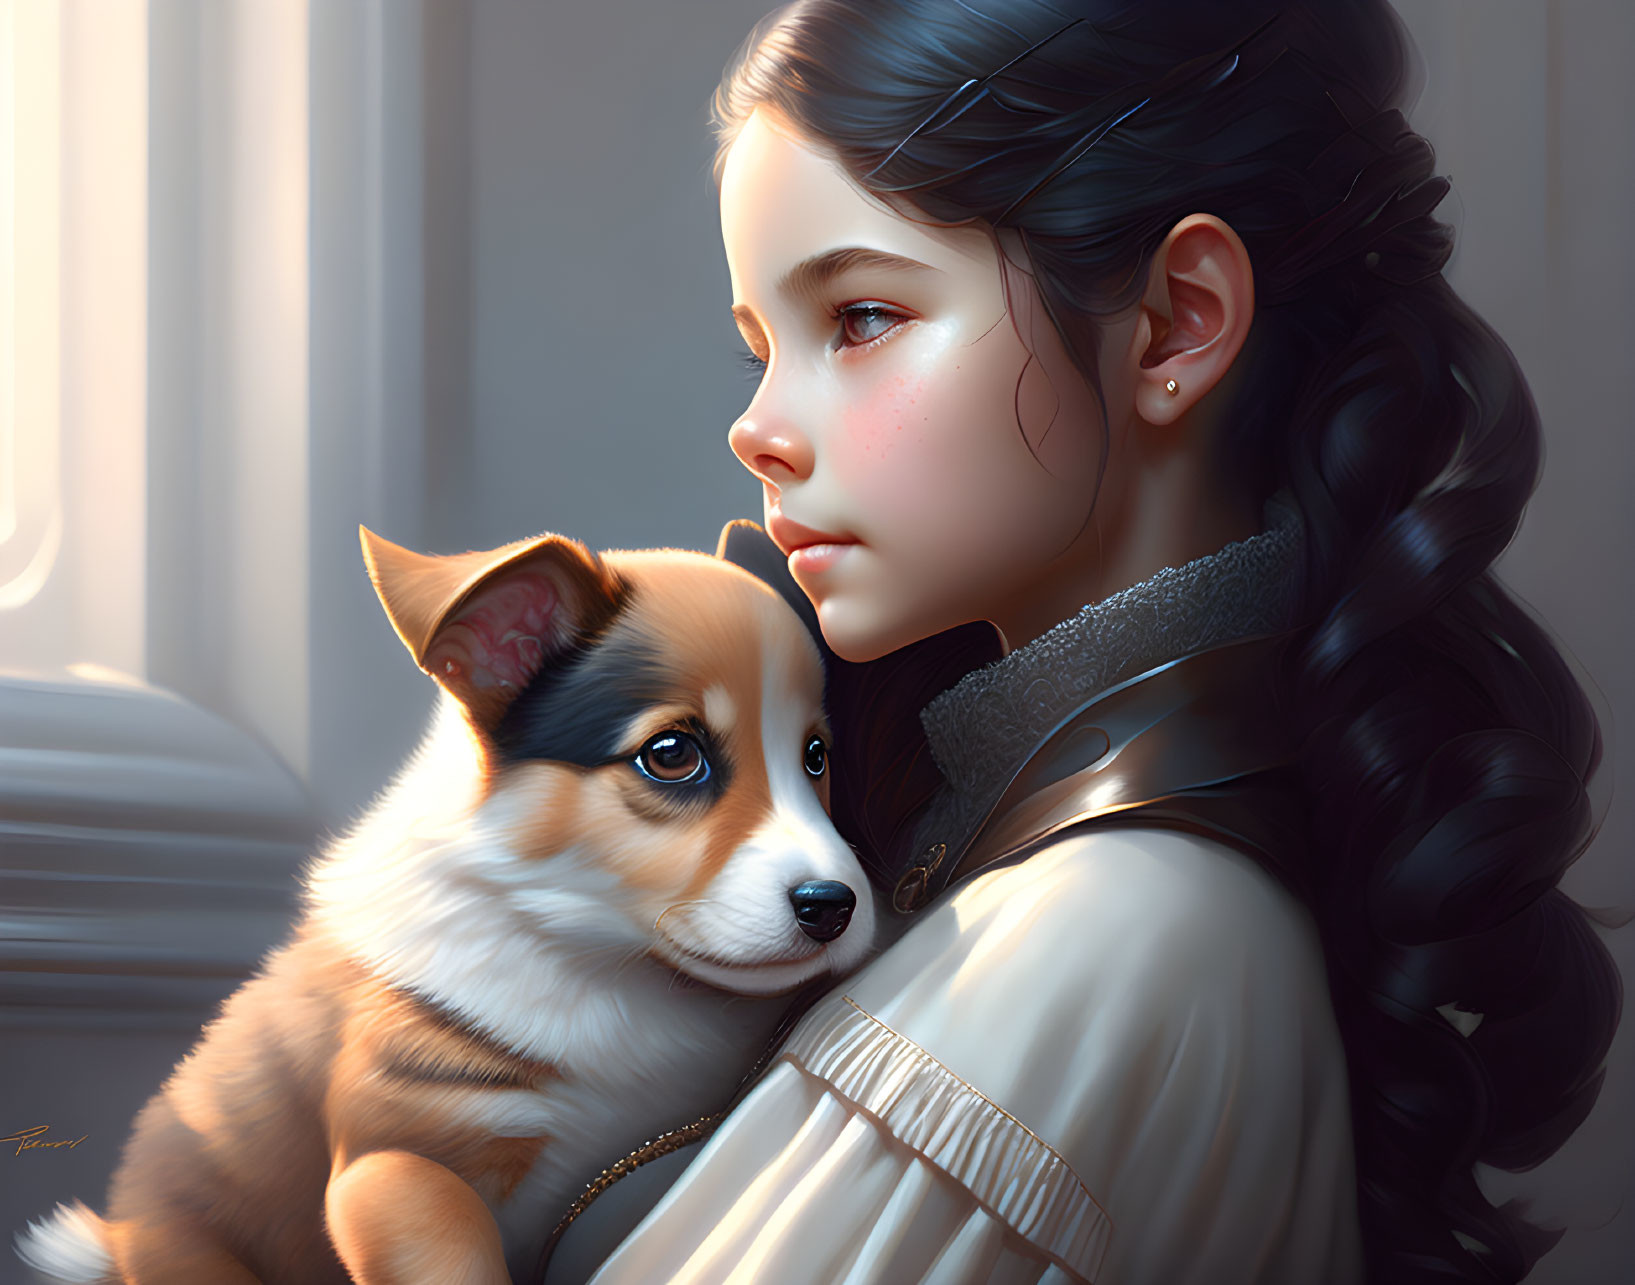 Young girl with braided hair holding small brown and white puppy in thoughtful gaze